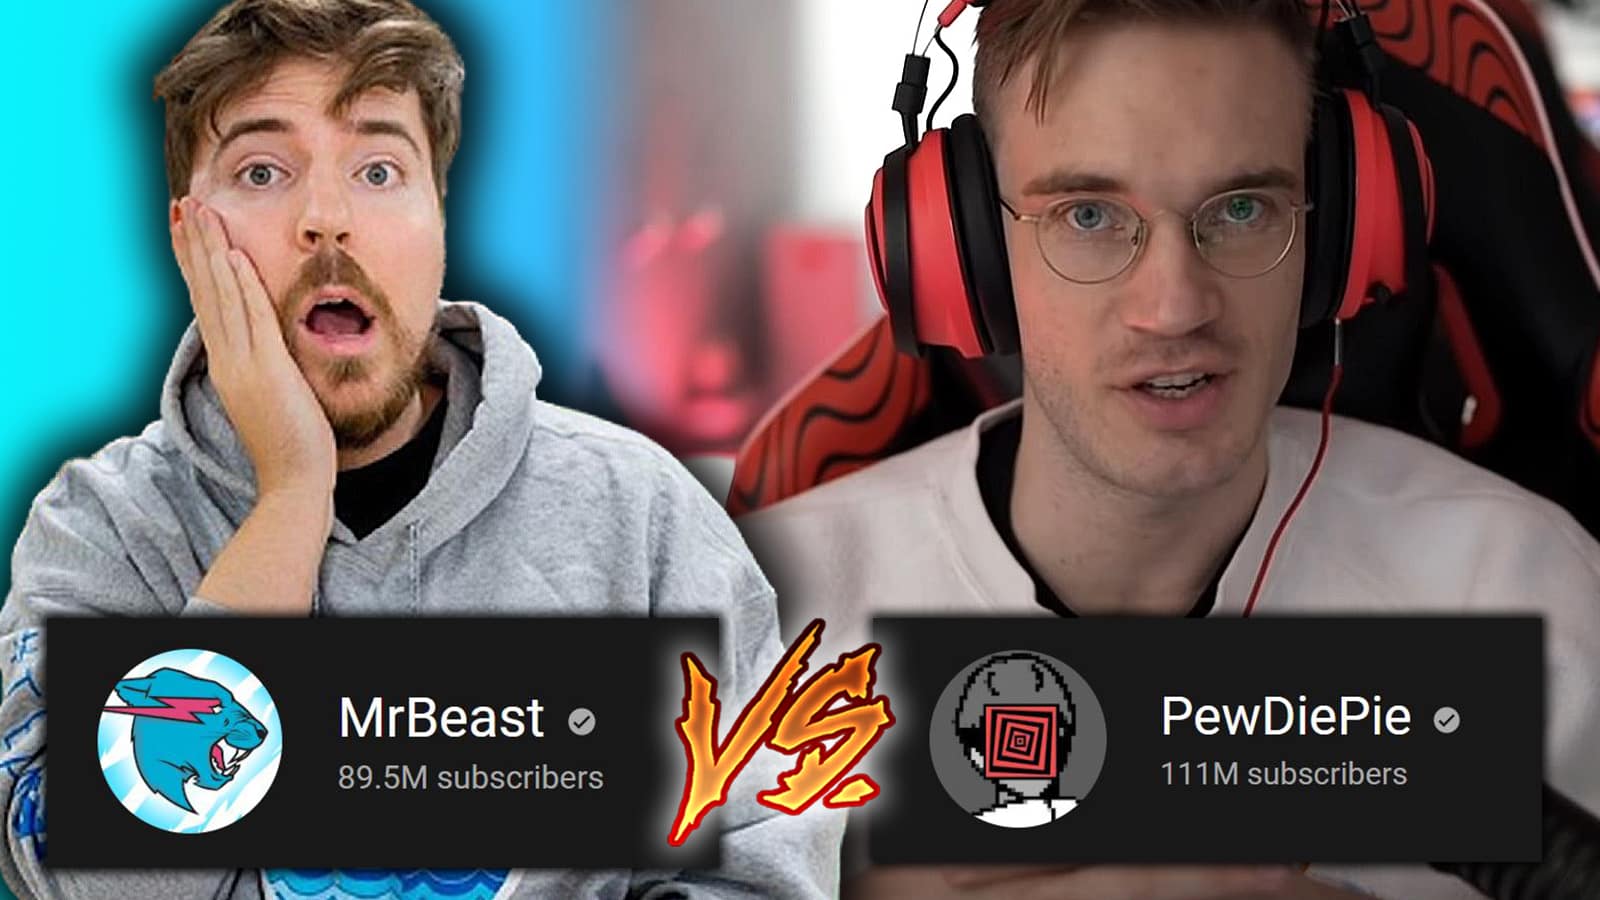 MrBeast Breaks Another  Sub Record for 2022